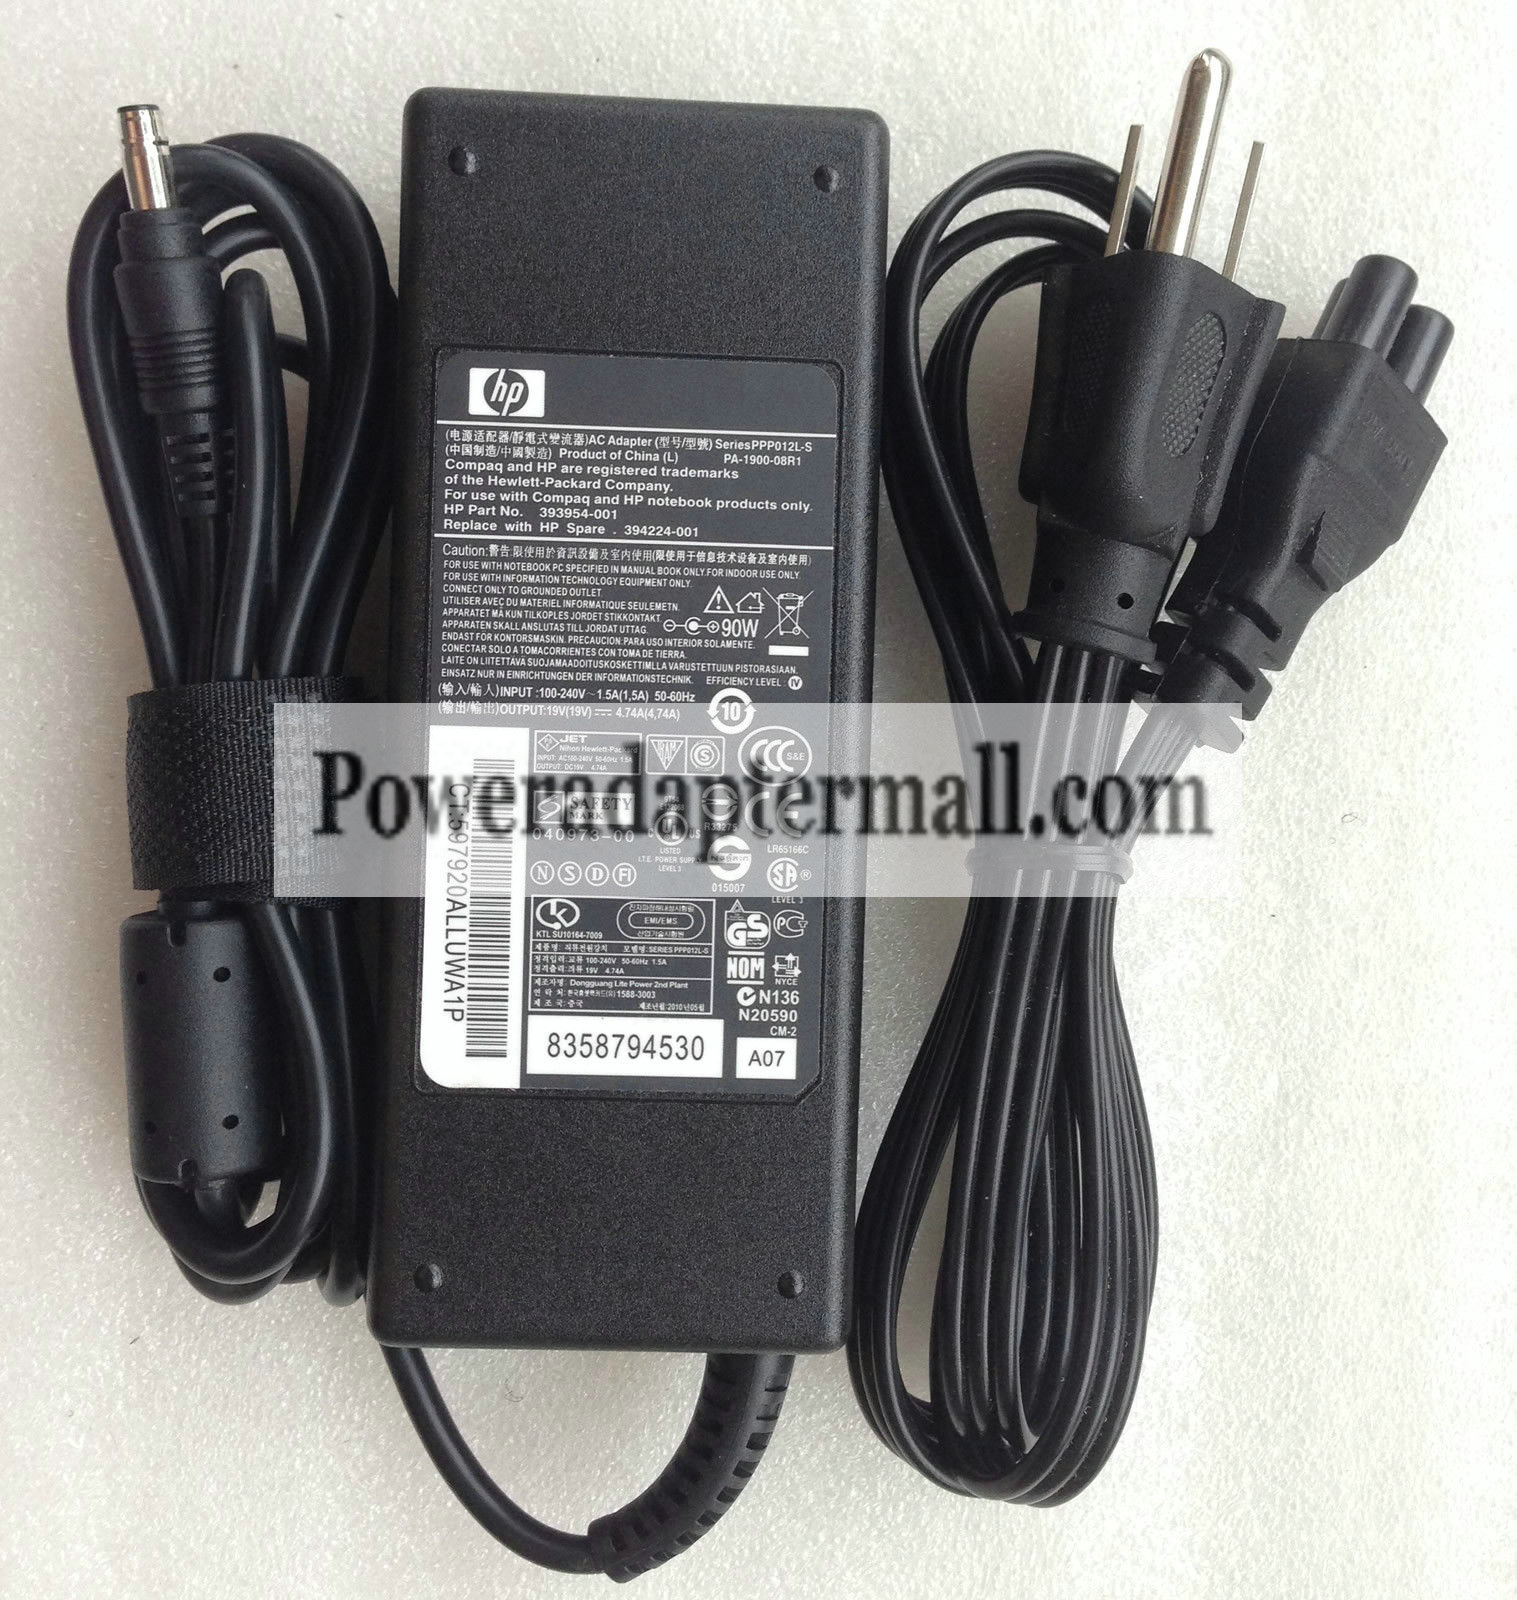 HP 19V 4.74A 90W AC Adapter for HP Compaq 6520s Notebook PC